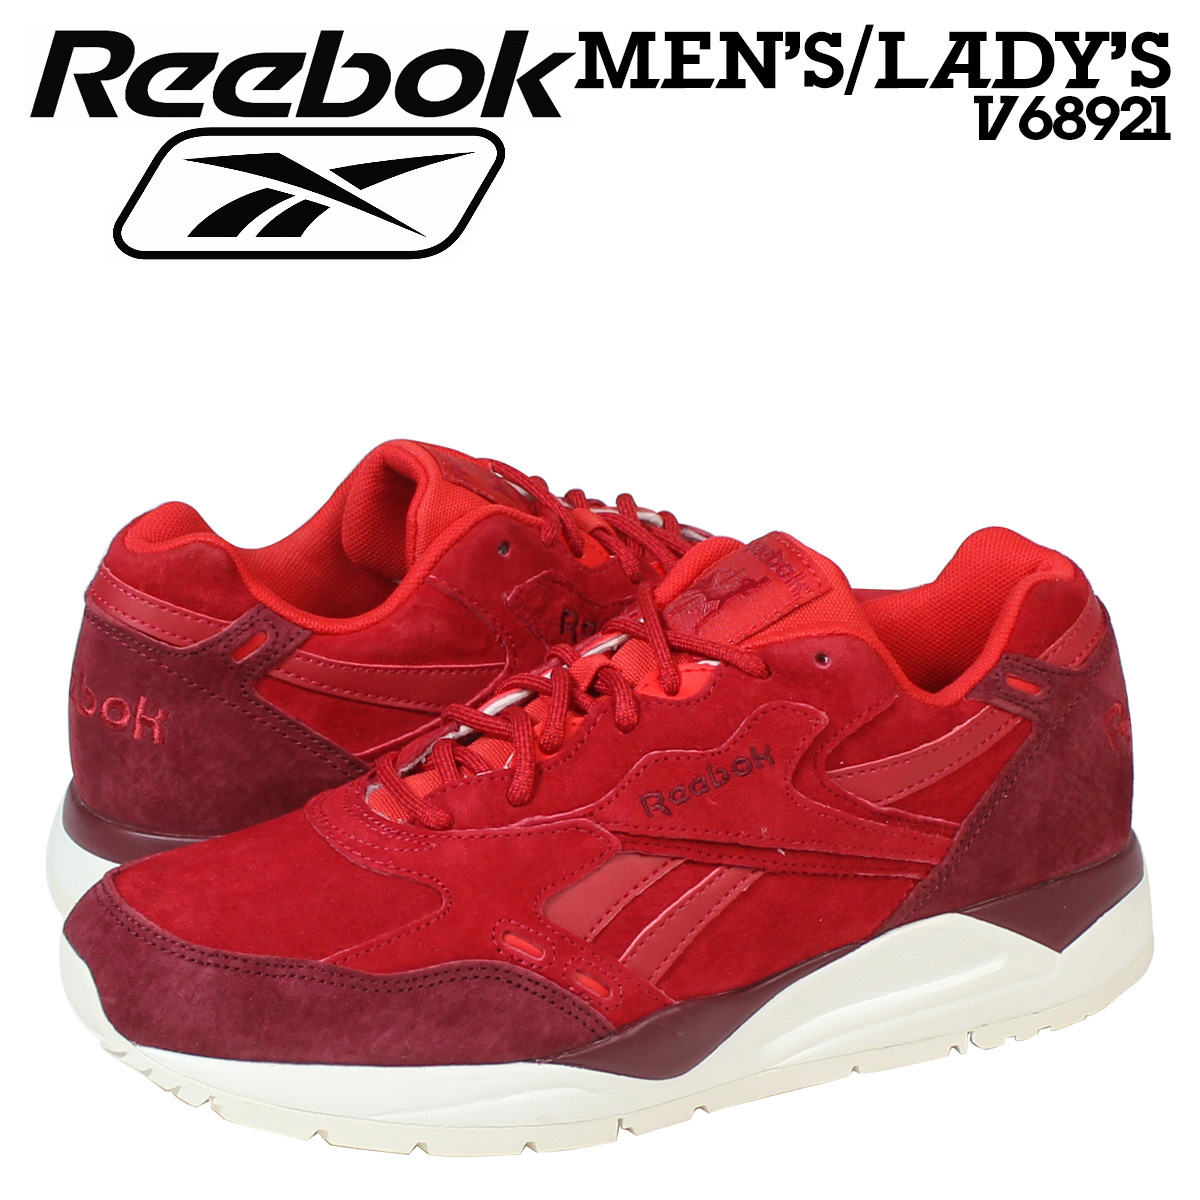 rbk shoes red